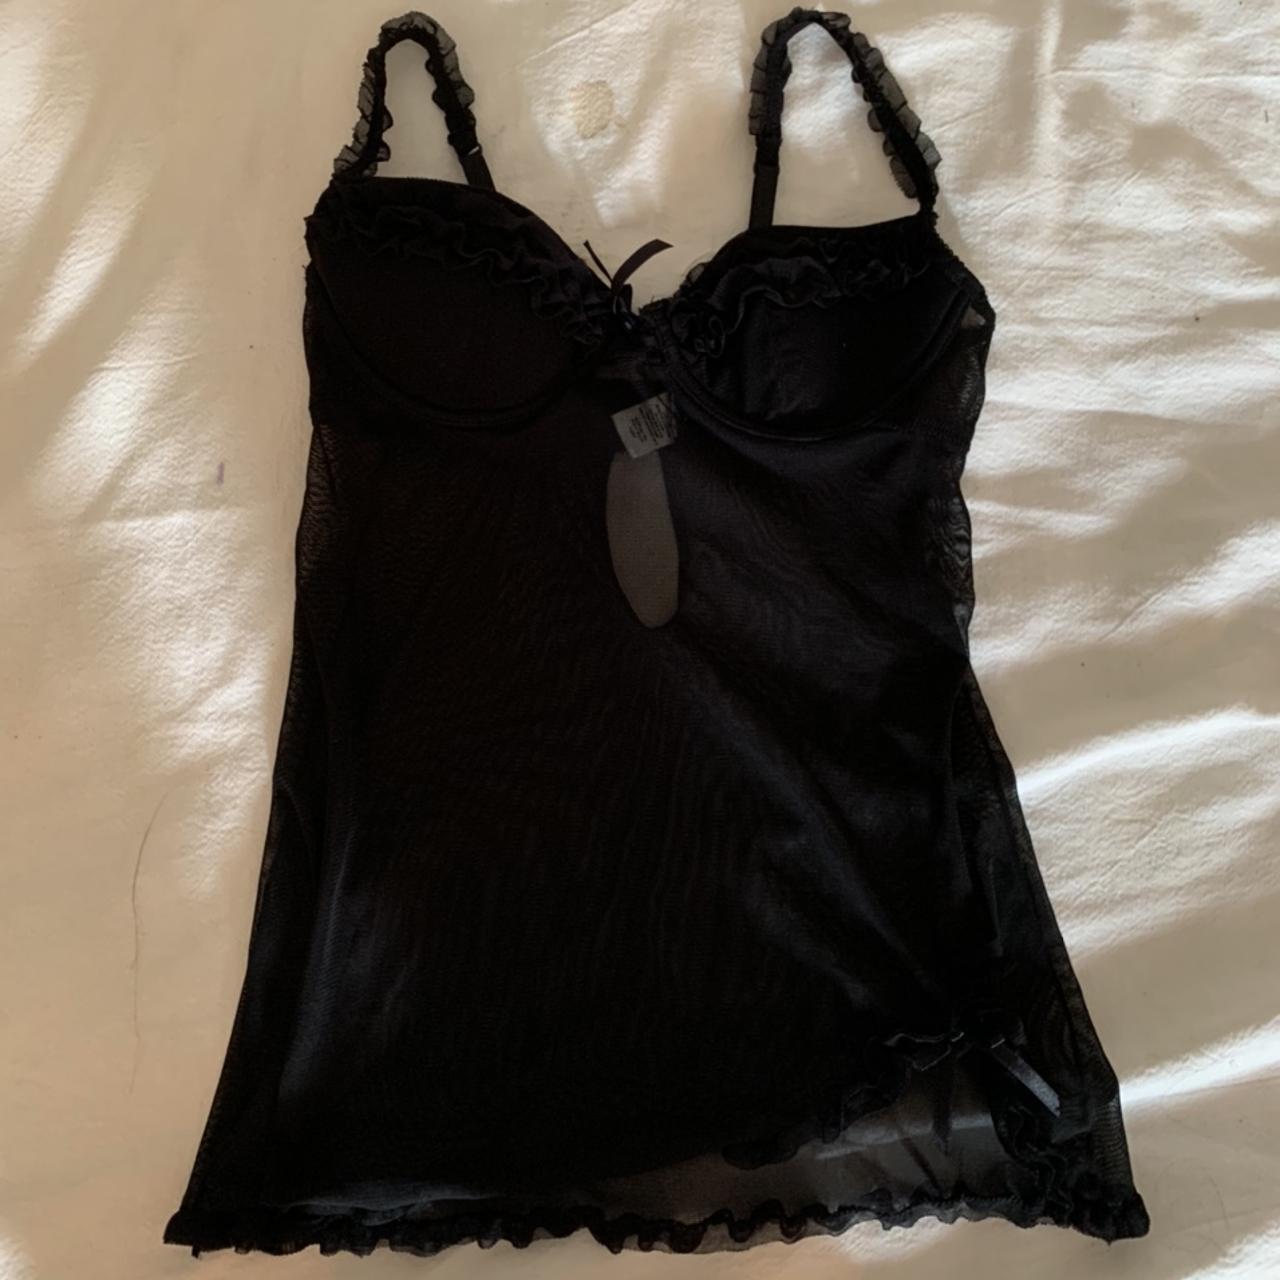 Simple yet sexy lingerie top If you’re brave can be... - Depop